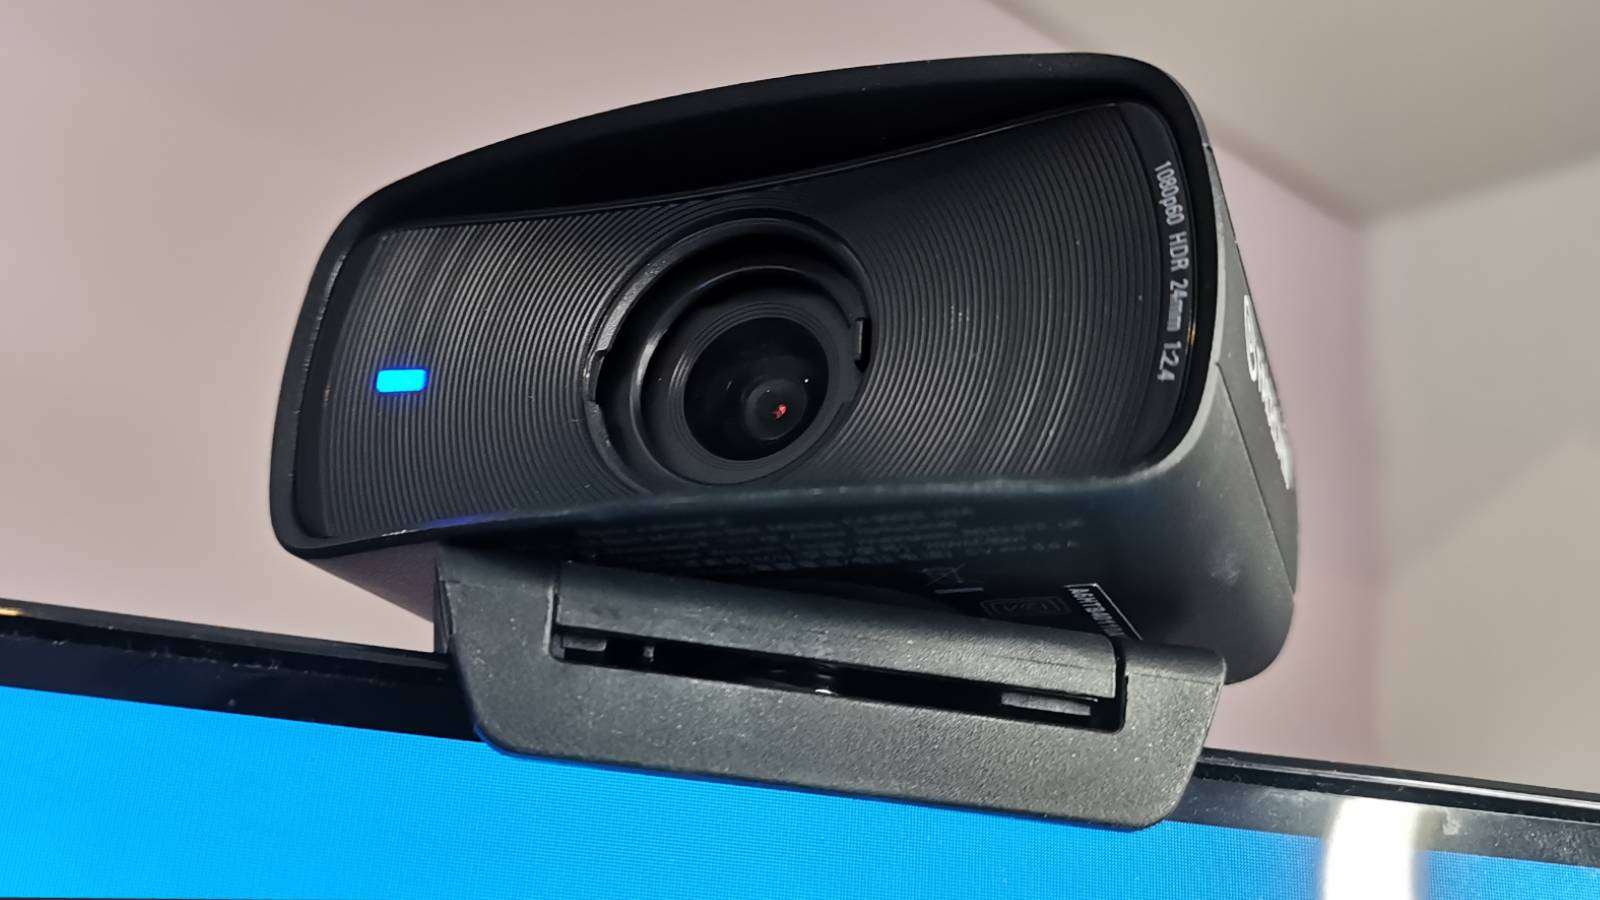 Photo of the Elgato Facecam MK.2 sitting on top of a black monitor.